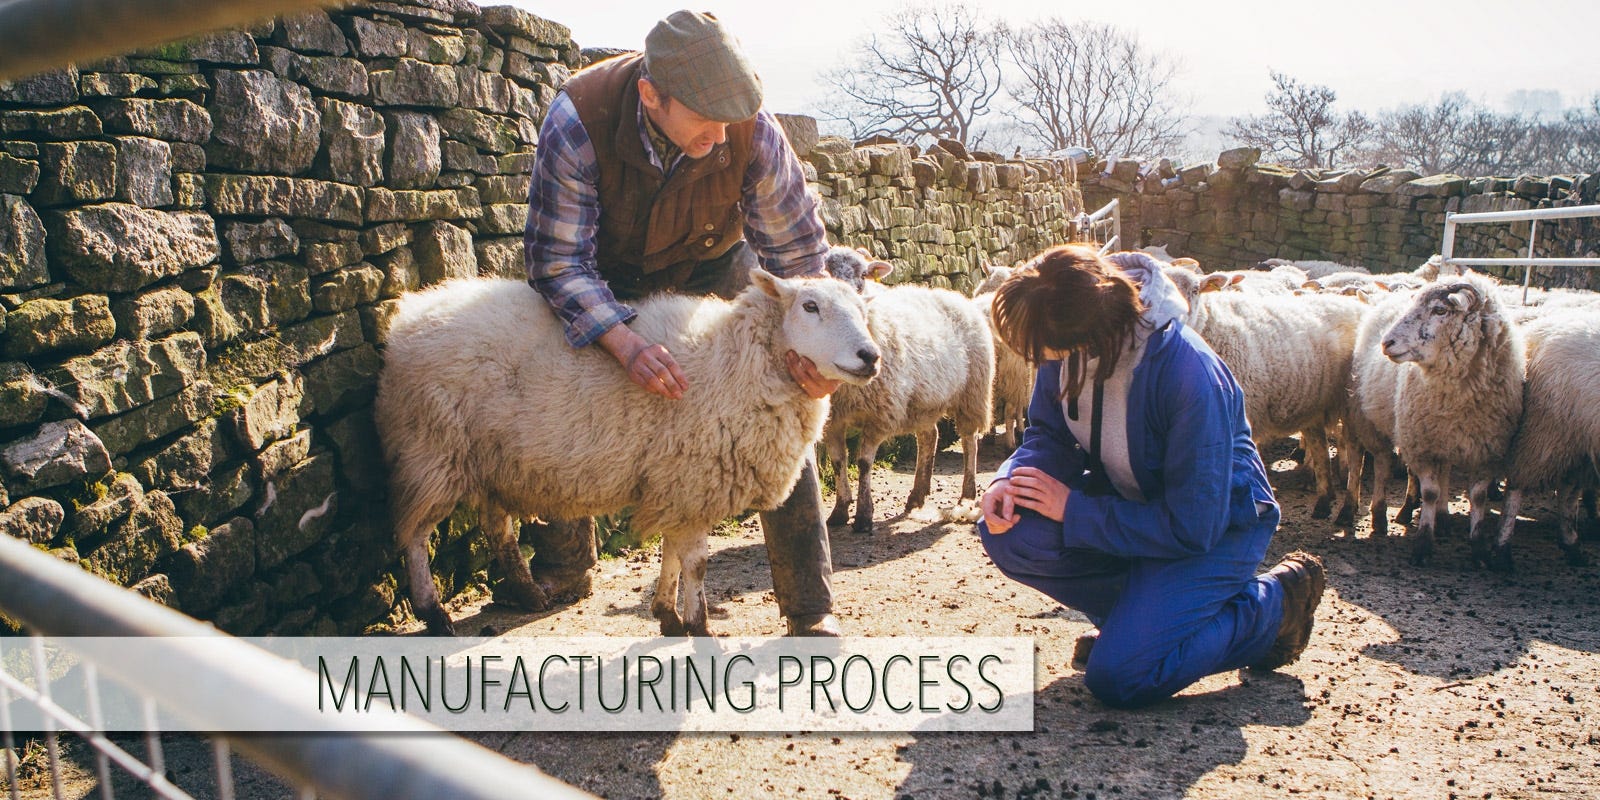 How Do You Process Raw Wool Into Mattresses?